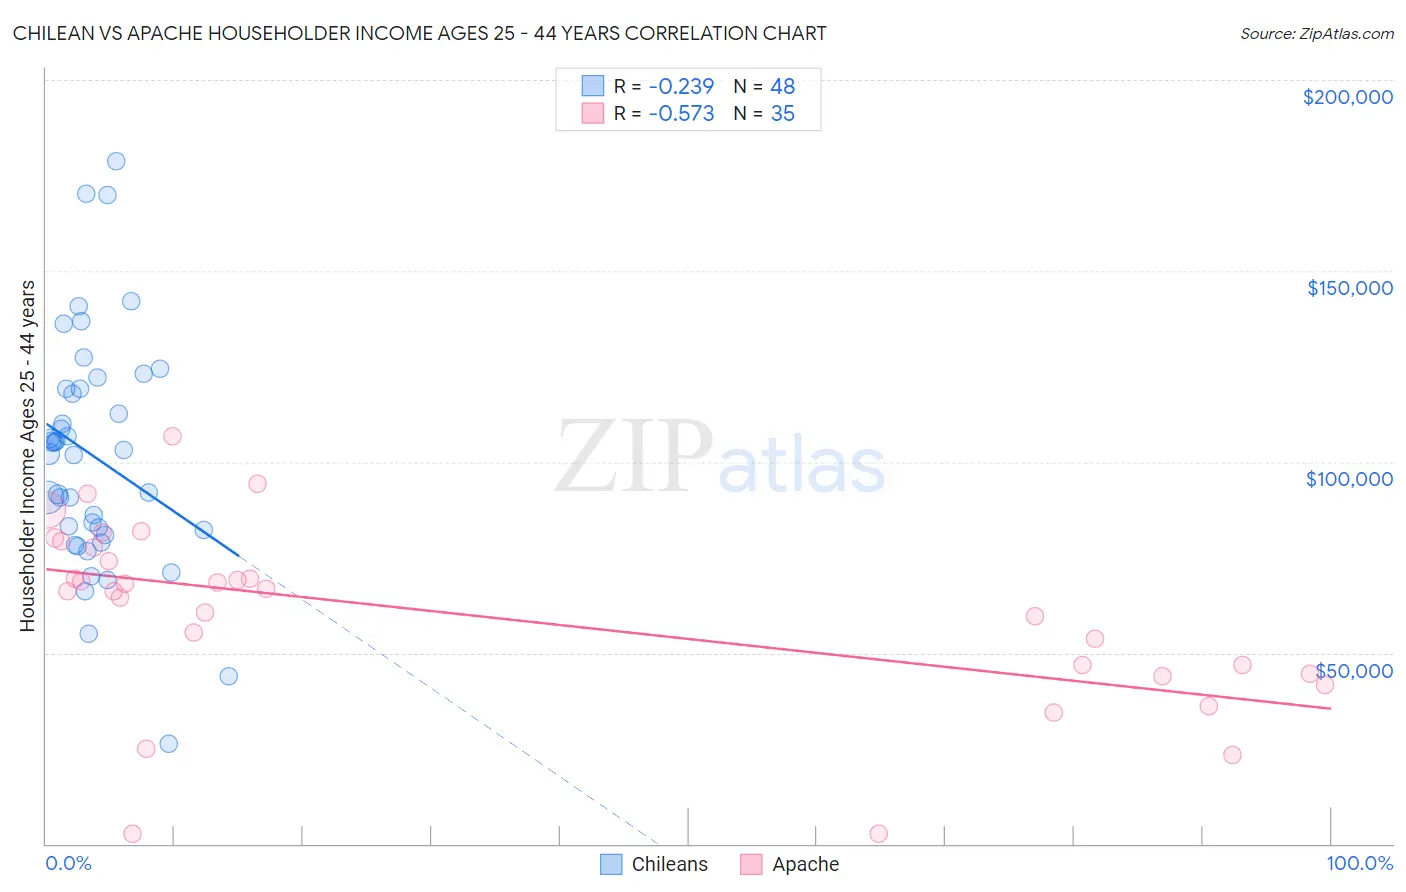 Chilean vs Apache Householder Income Ages 25 - 44 years